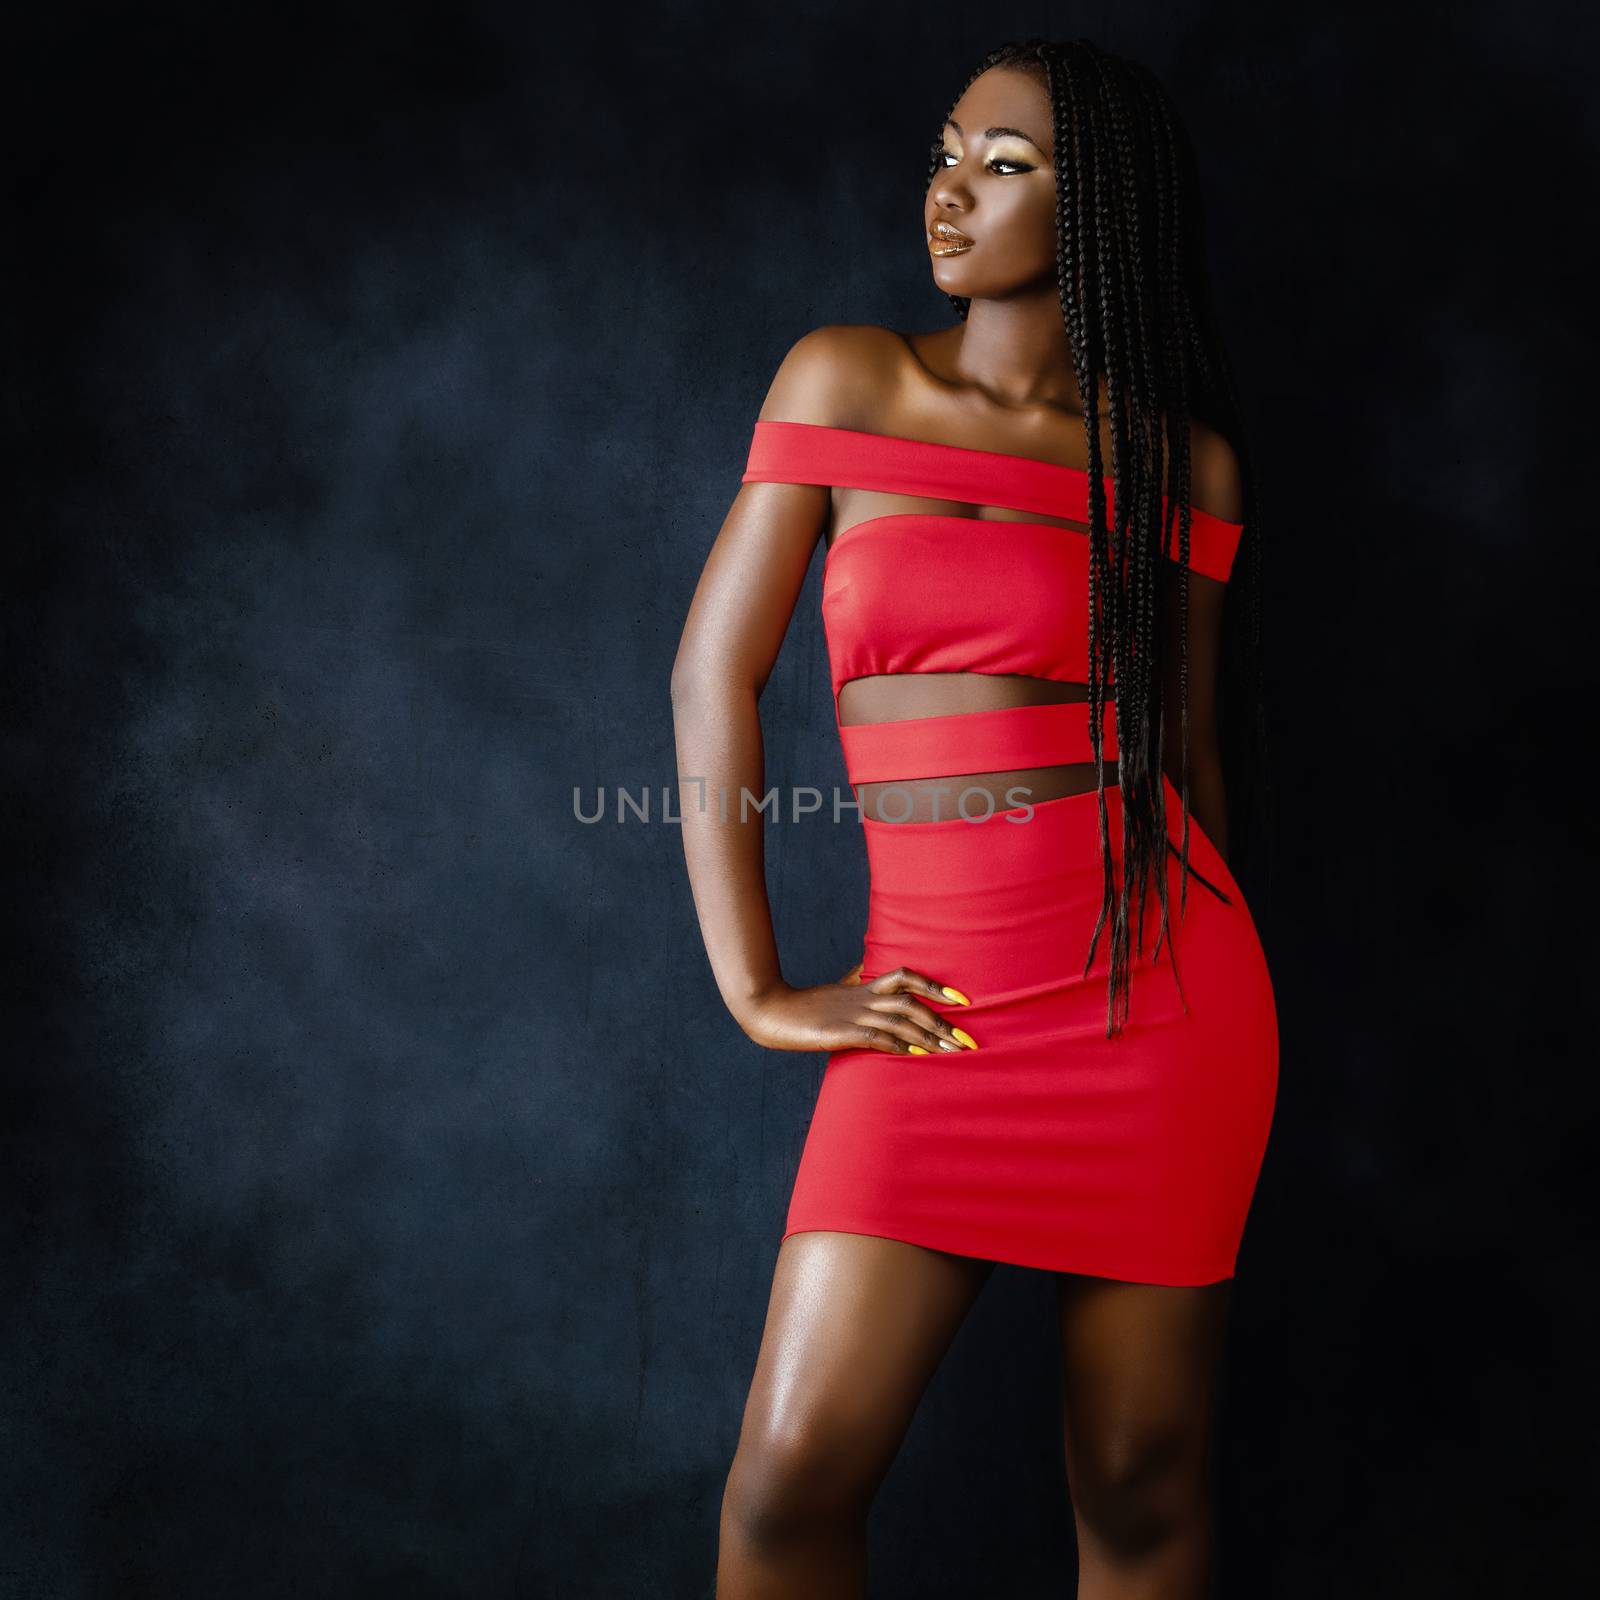 Sexy african woman in red dress. by karelnoppe